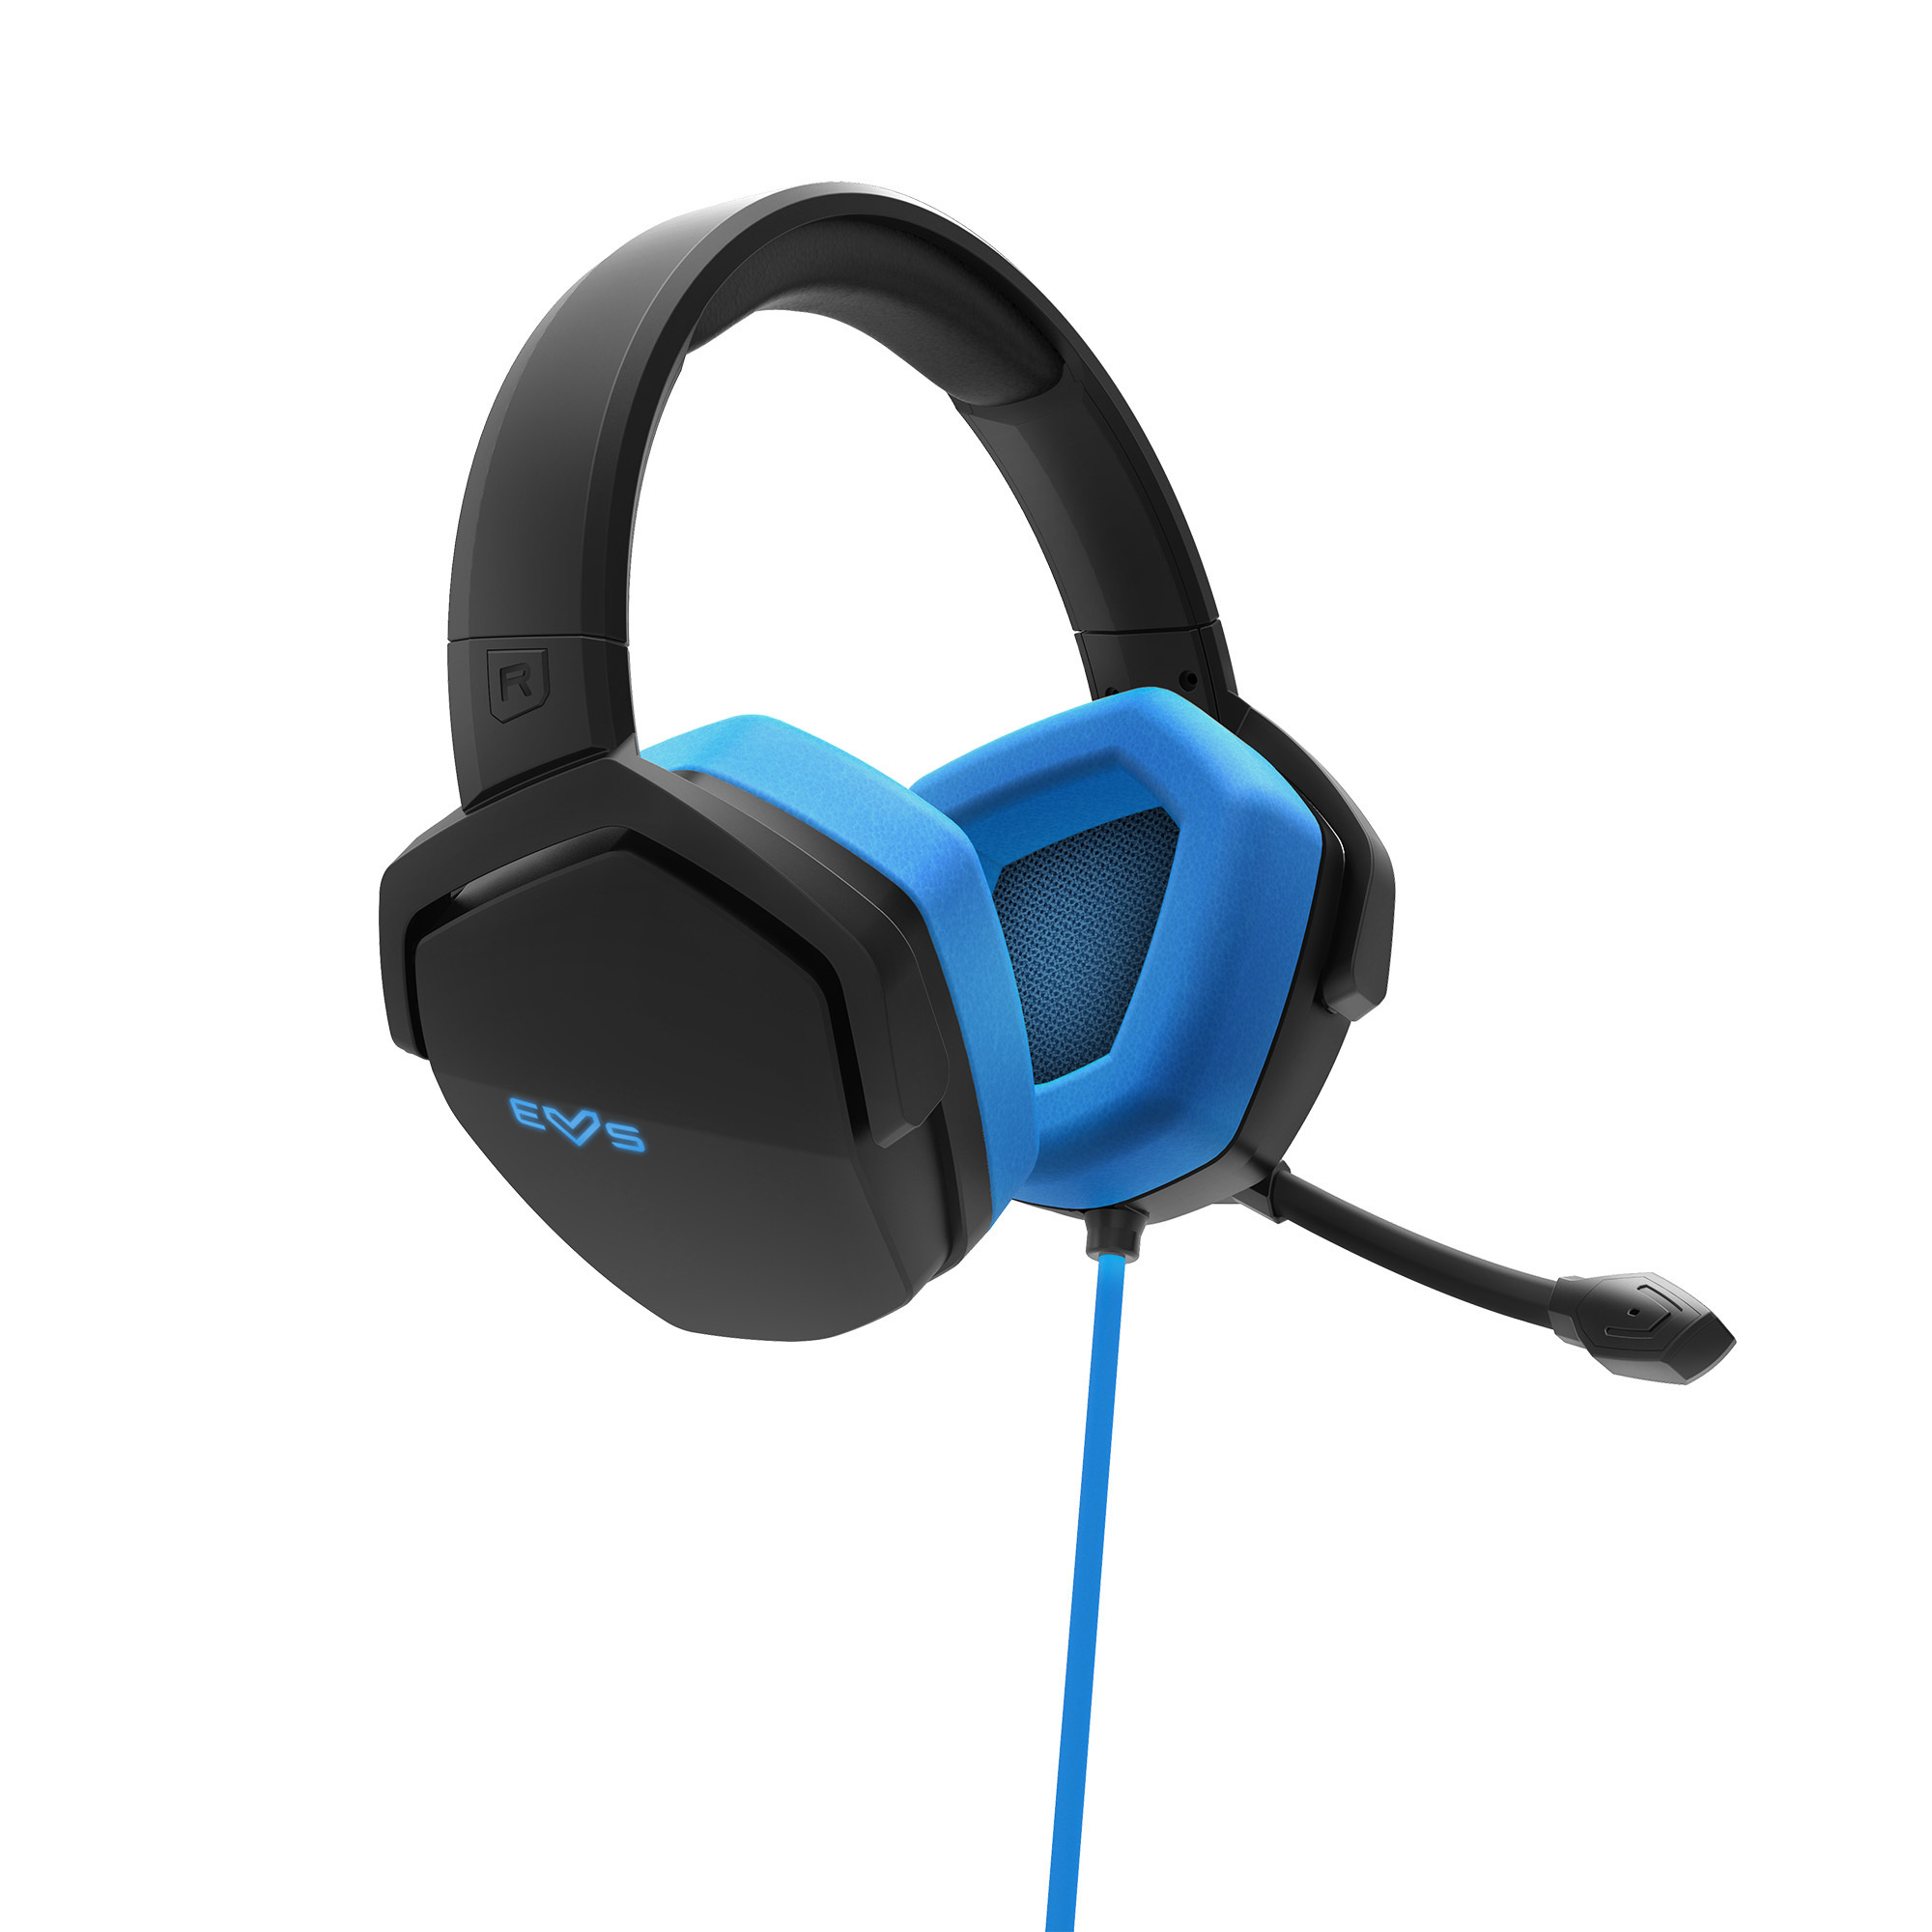 Cascos gamer para Switch (Dock Station), PS4/5 y Windows PC